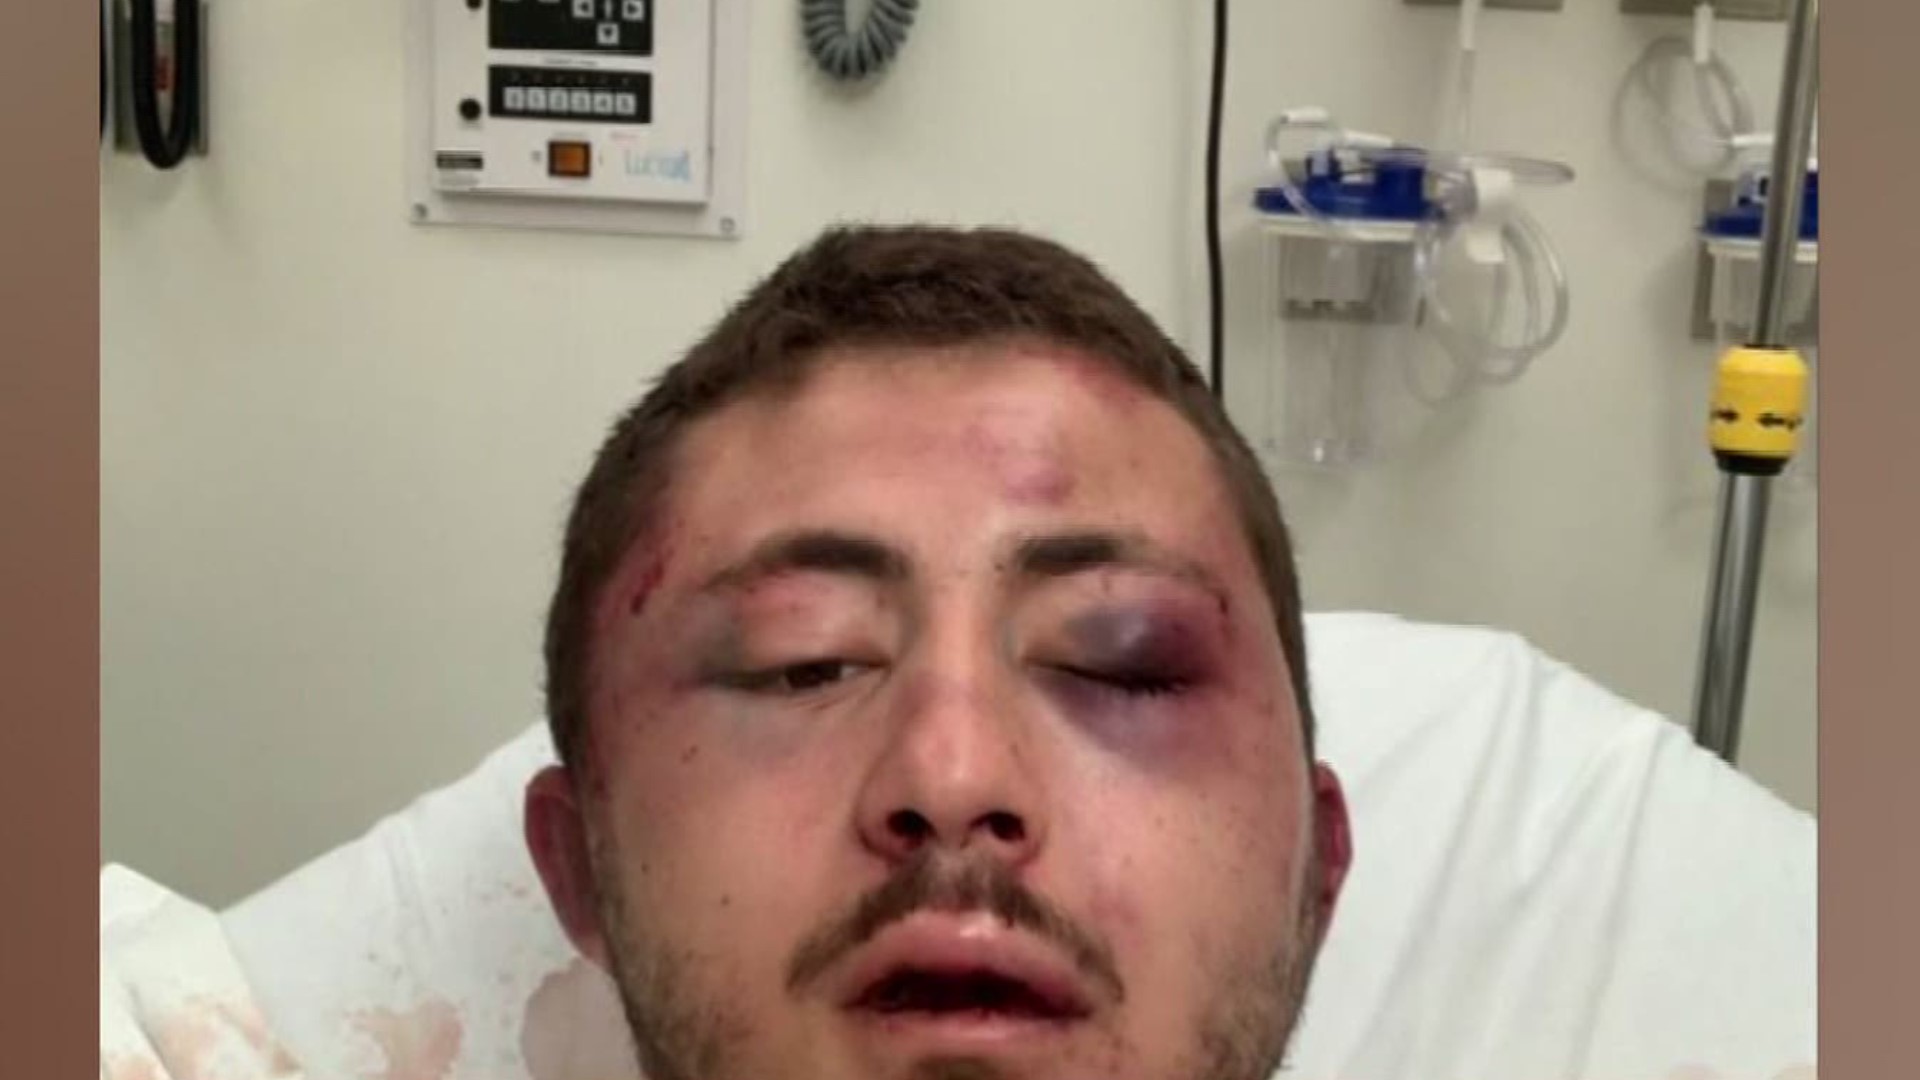 He suffered a concussion, a broken nose and bleeding. His coworkers helped pull the attacker off him and created a GoFundMe for his hospital expenses.